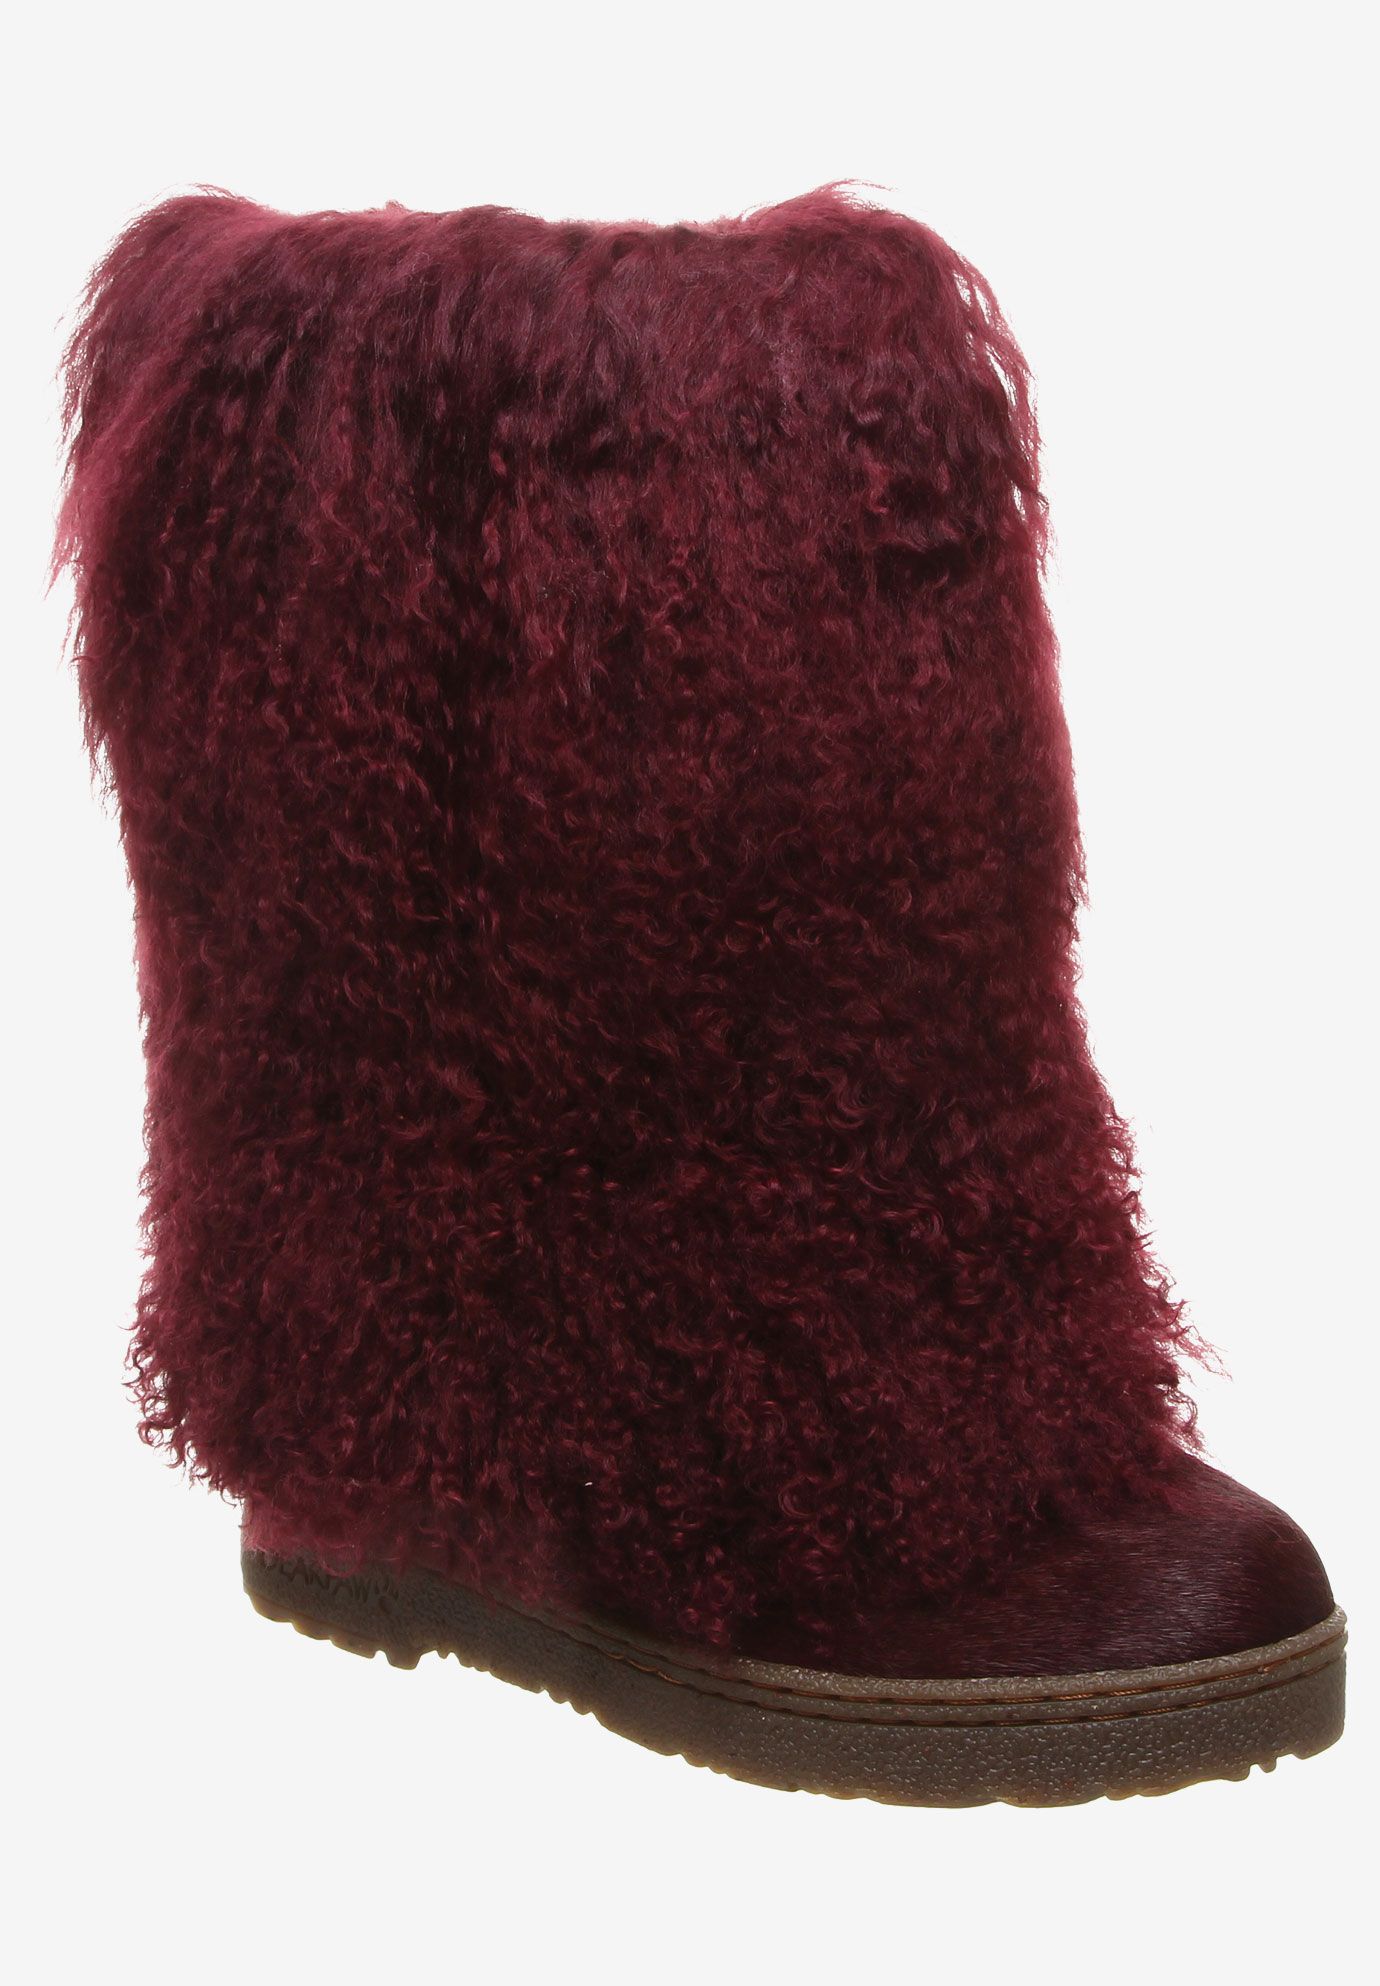 bearpaw red boots